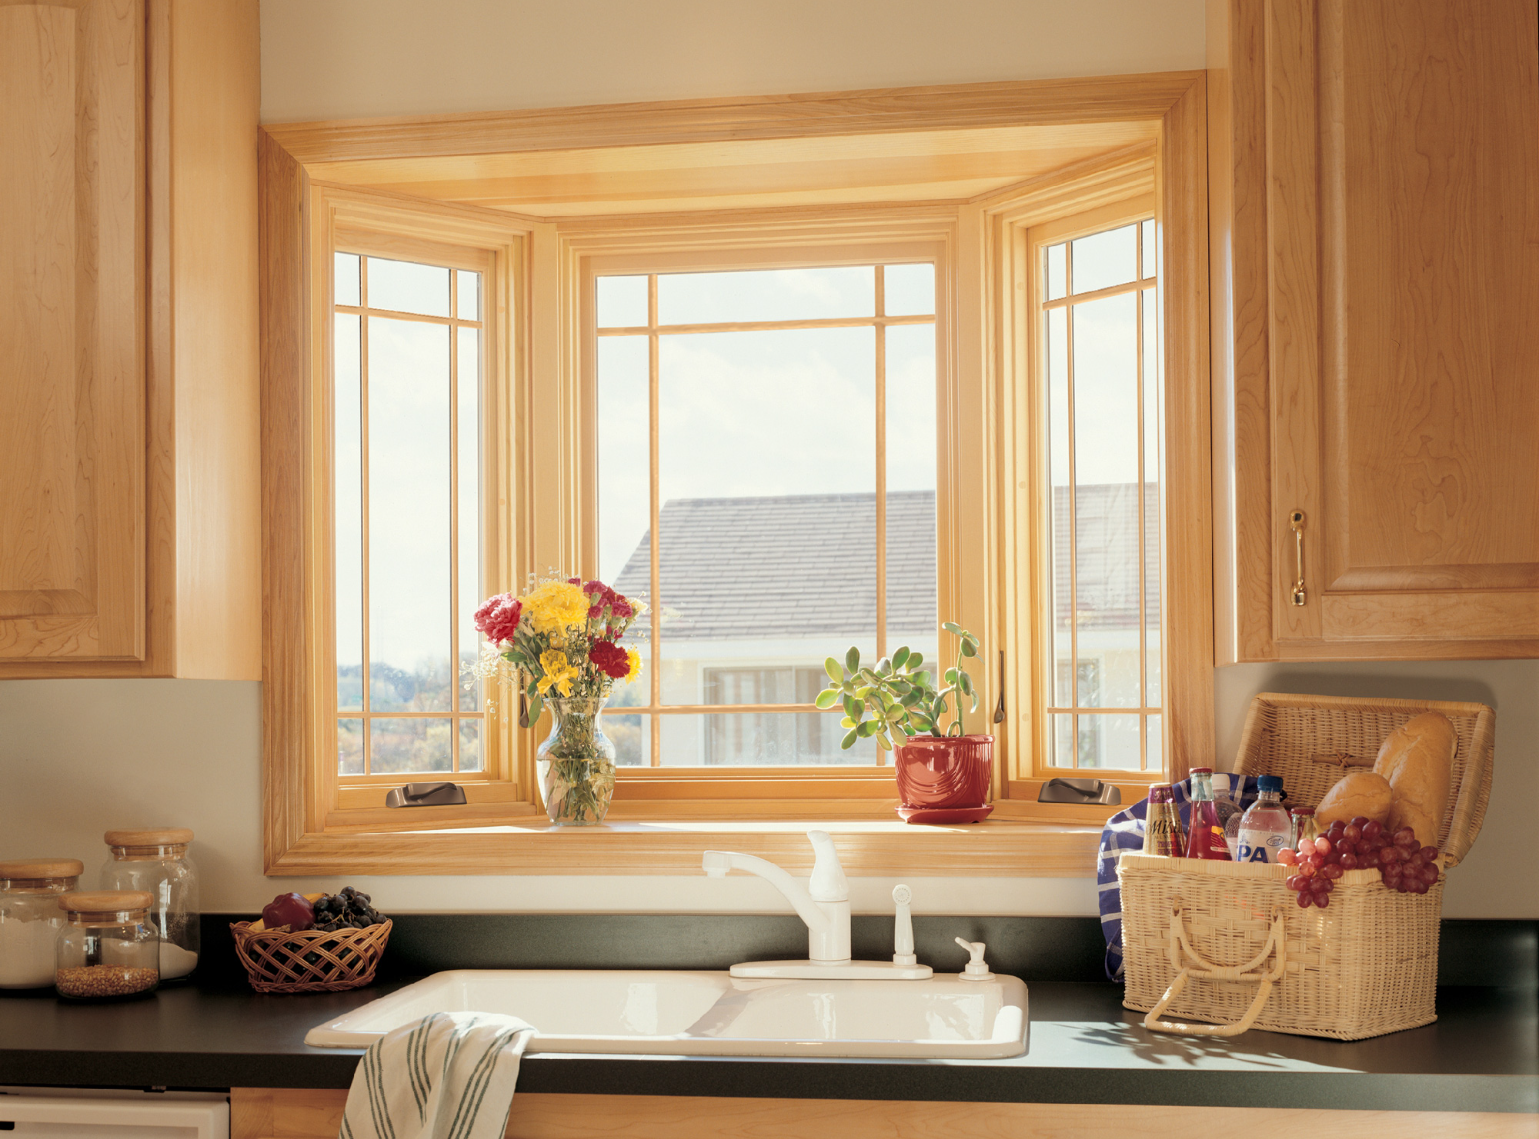 Bay window installed in a kitchen over a sink.